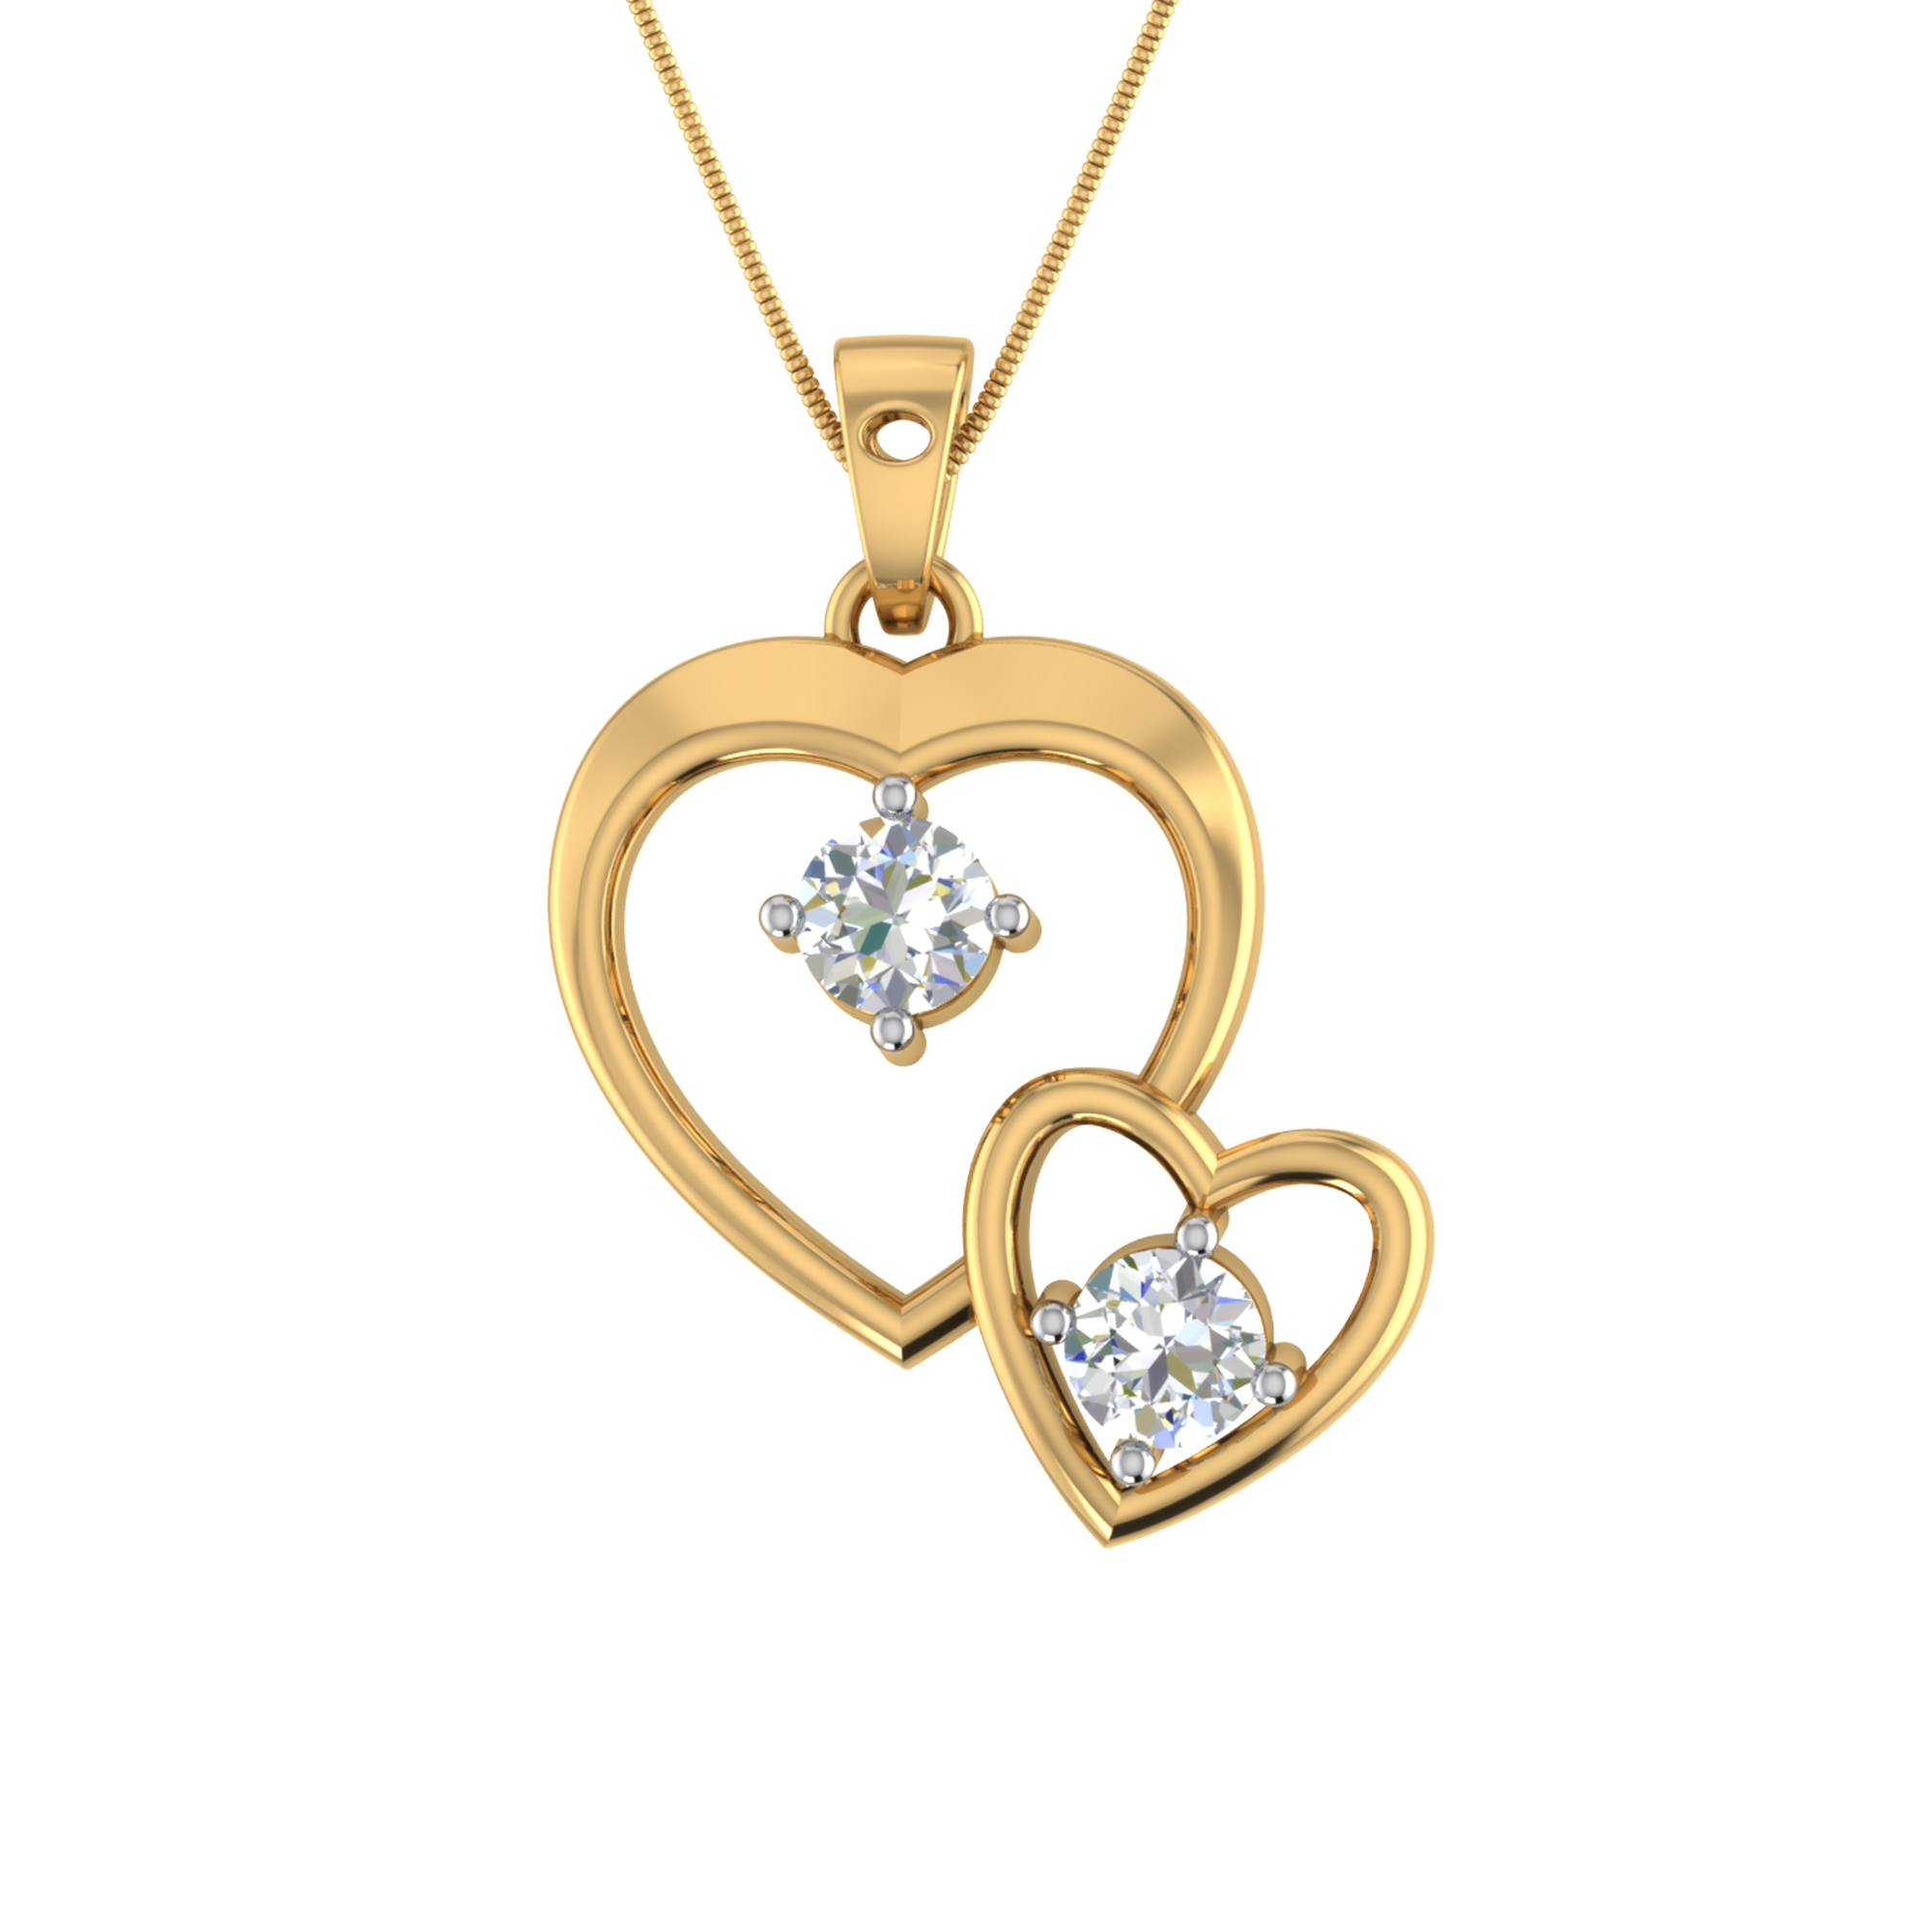 Diamond Necklaces | Pendants and Bridal Necklaces | Forevermark